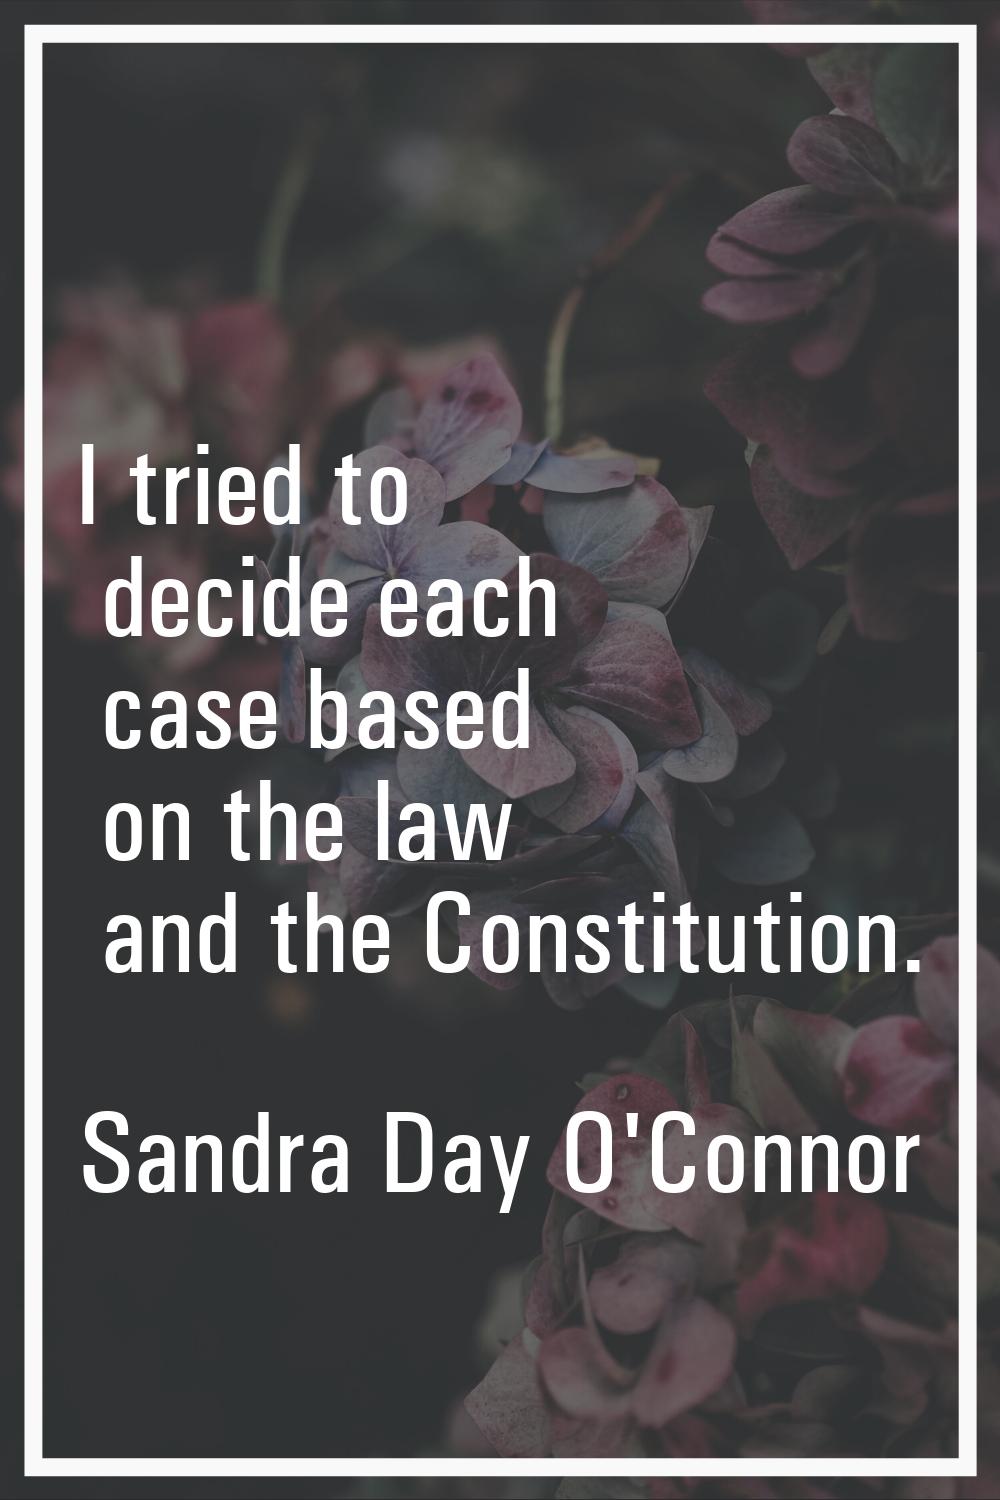 I tried to decide each case based on the law and the Constitution.